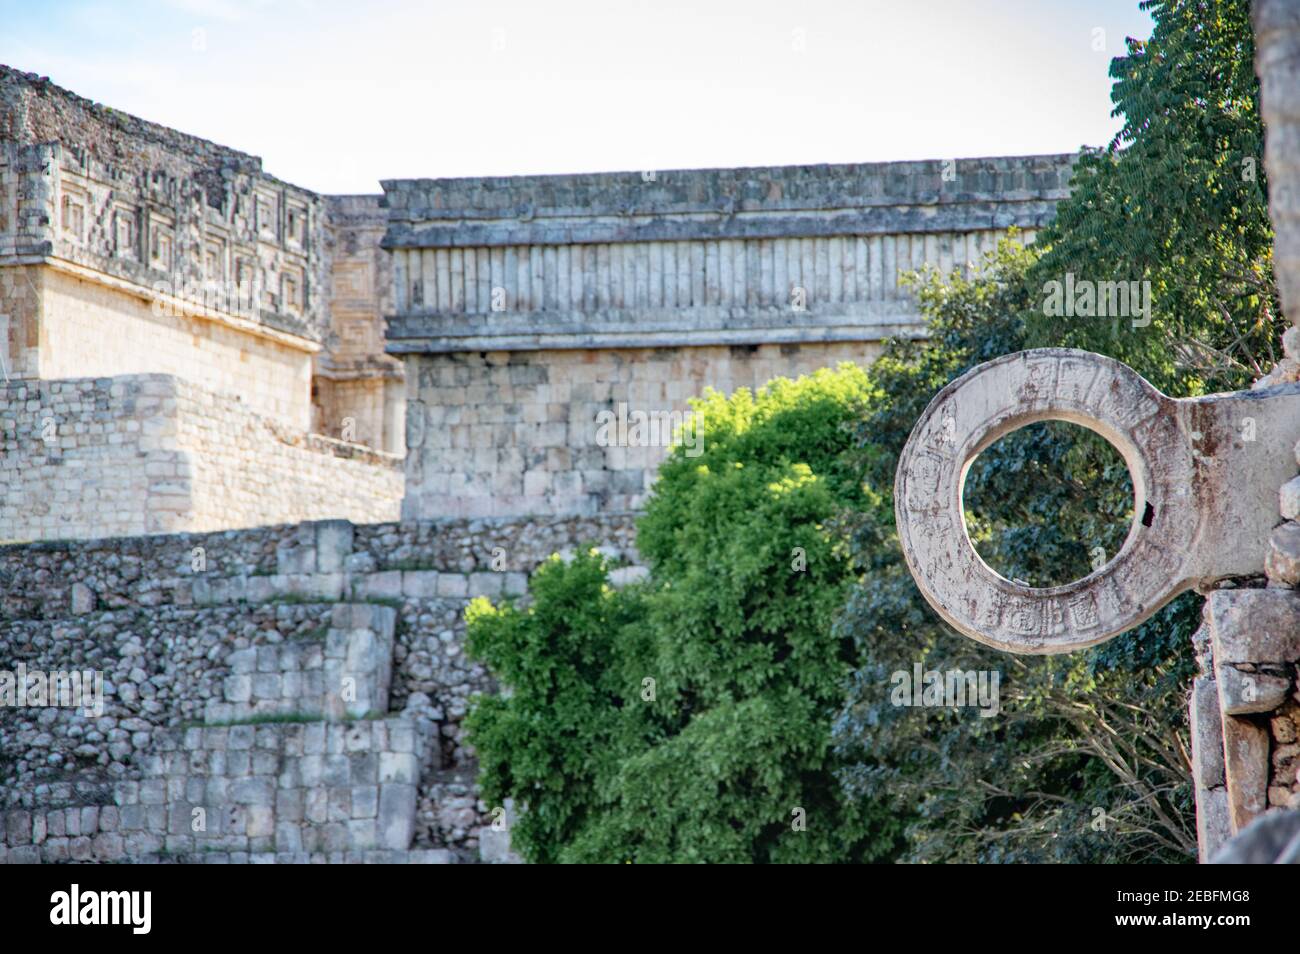 The ball court at the Mayan ruins of Uxmal in Yucatán, Mexico Stock Photo